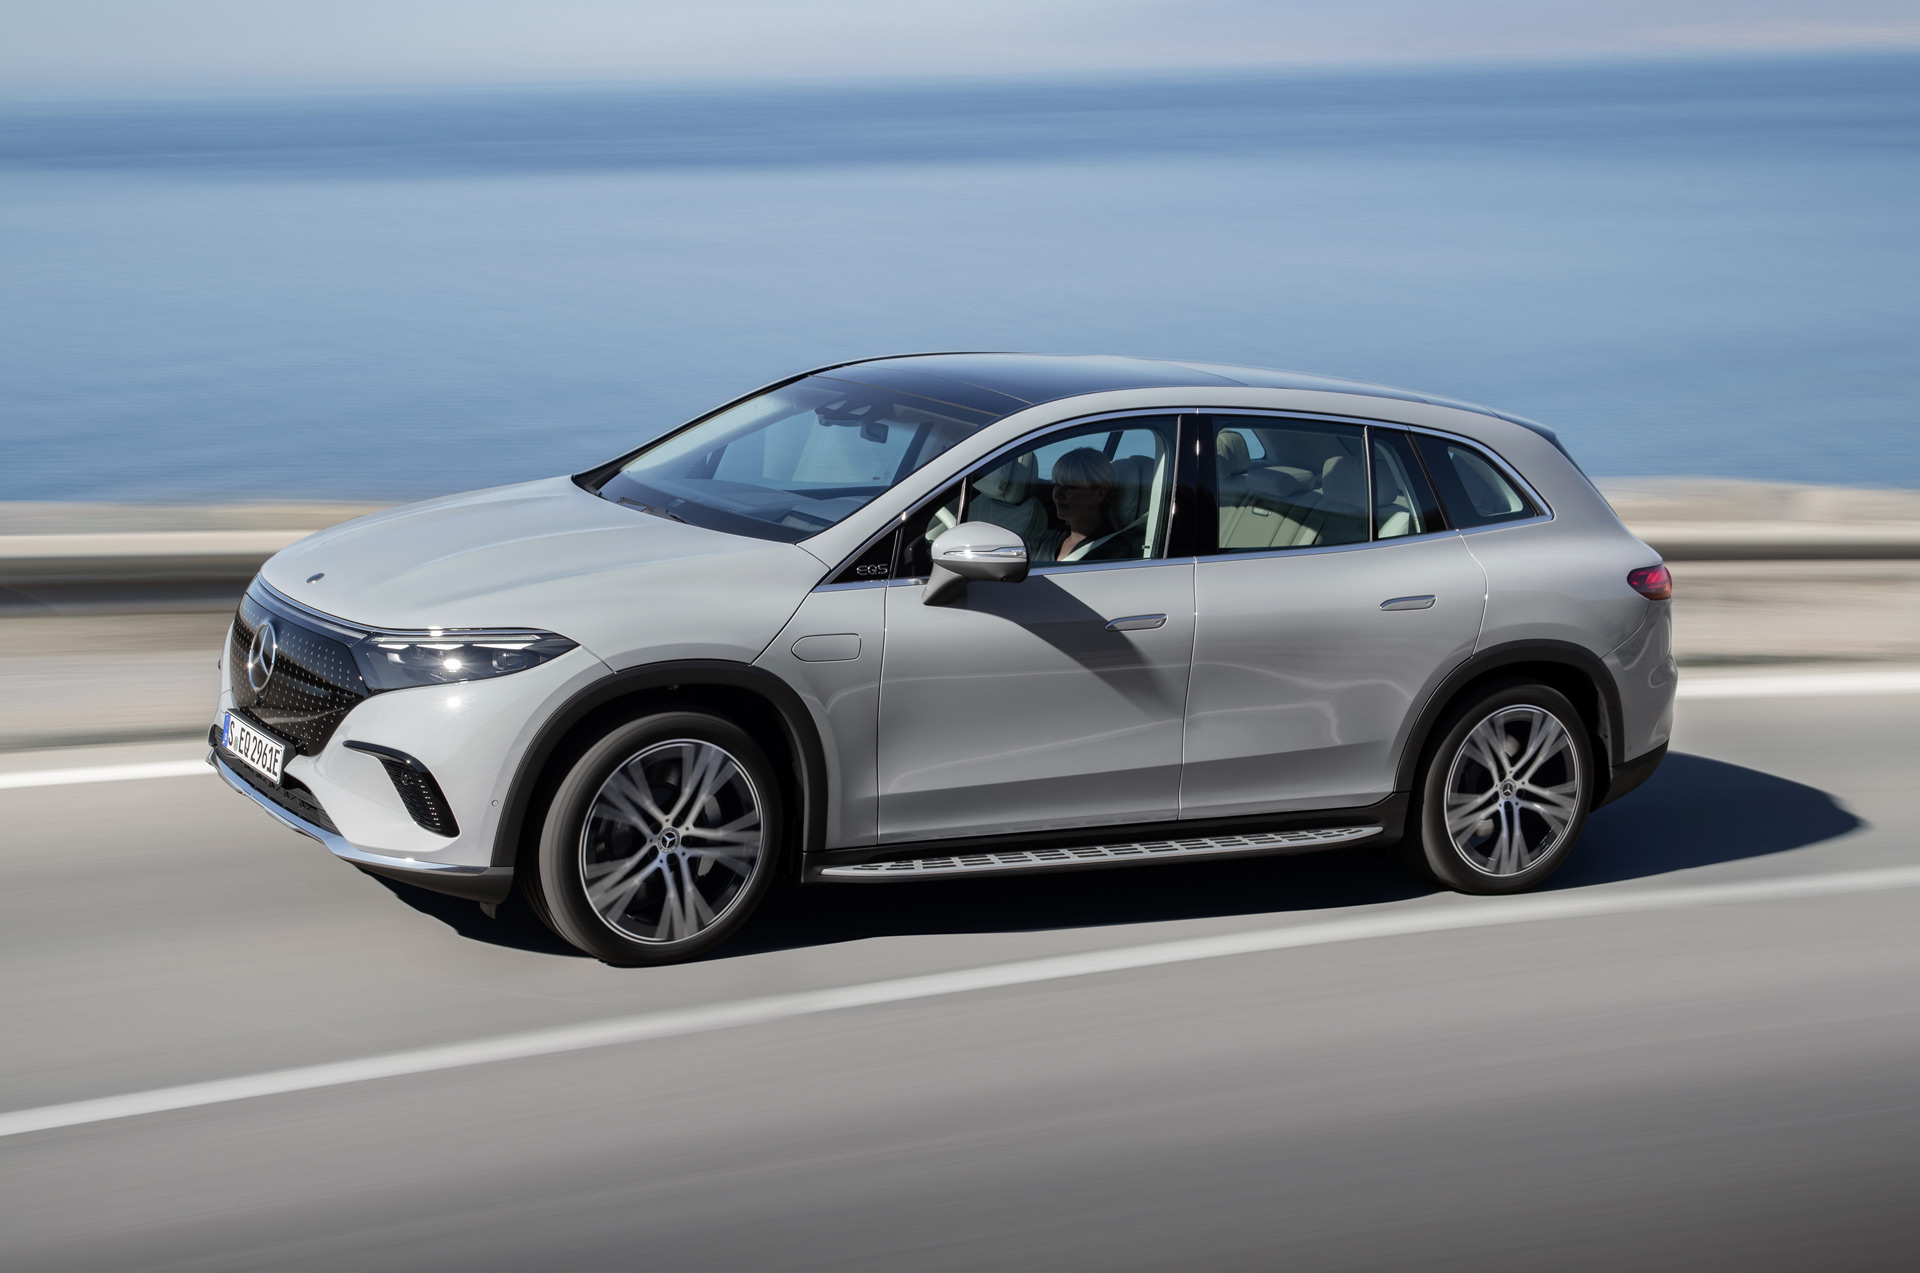 2023 MercedesBenz EQS SUV costs 105,550, offers up to 305 miles of range